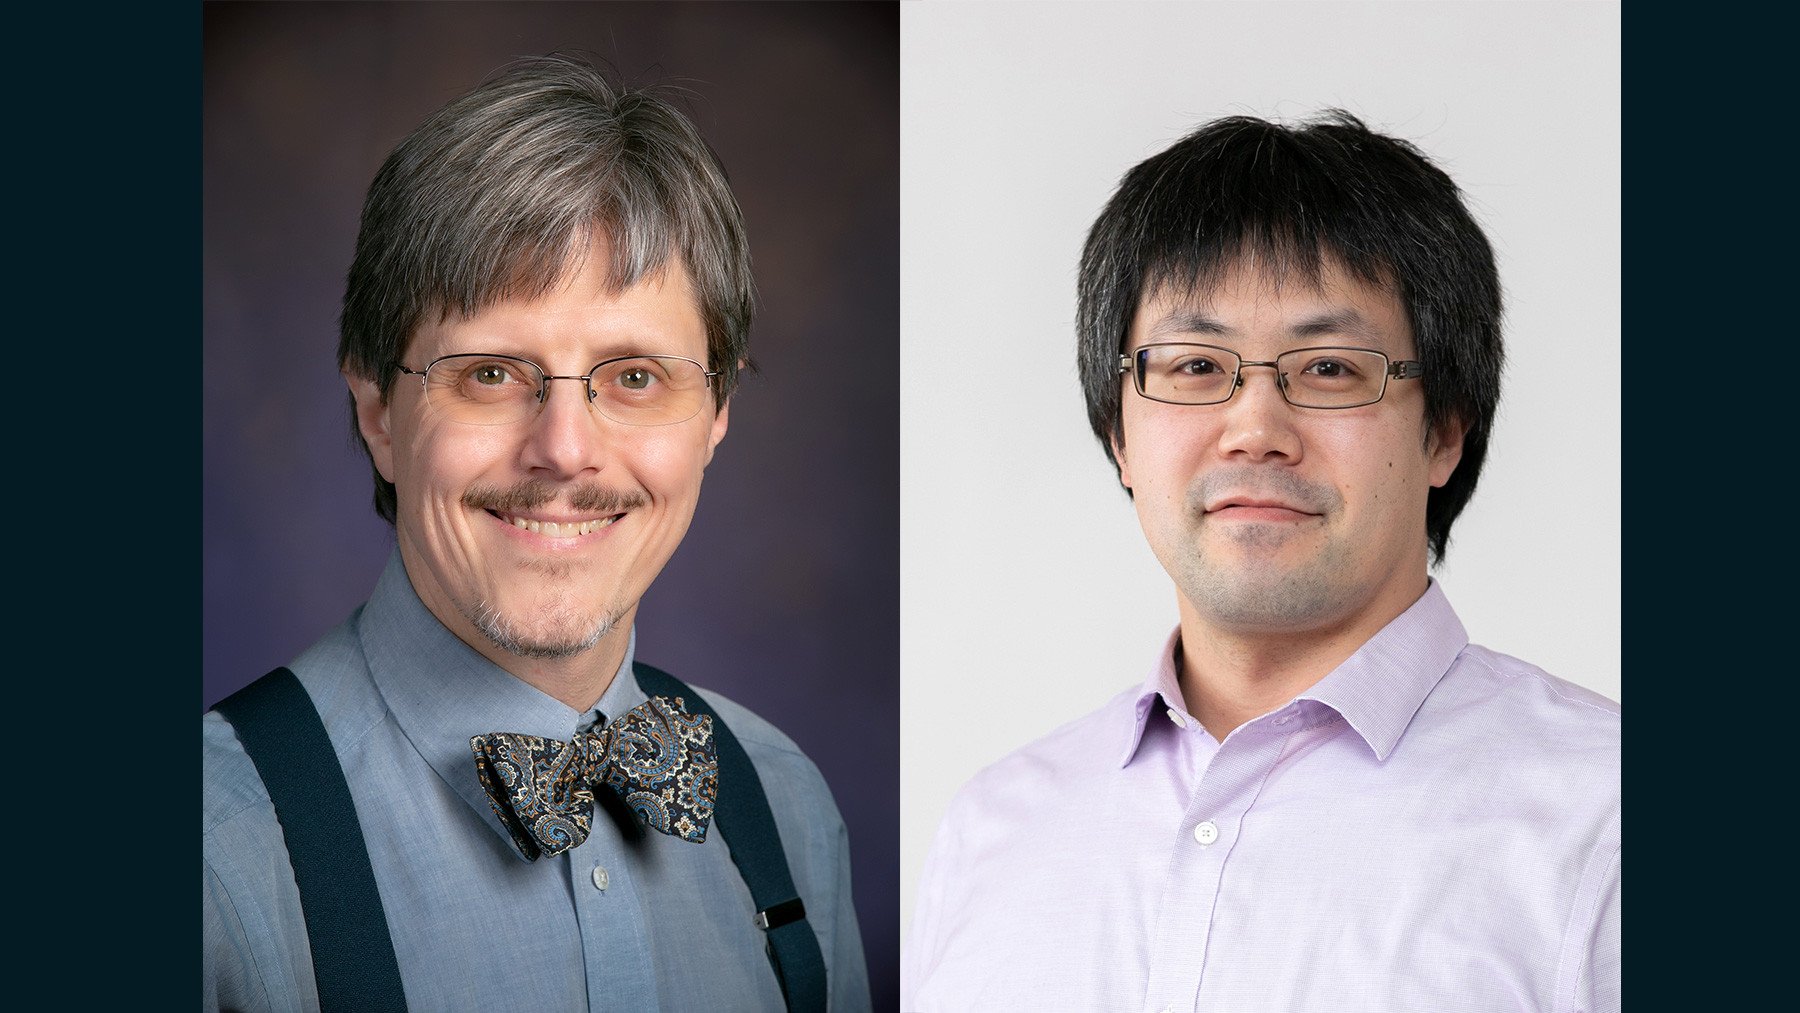 Illinois Professor Paul Kwiat and Professor Fumihiro Kaneda of the Frontier Research Institute for Interdisciplinary Sciences at Tohoku University. Kaneda is a former postdoctoral researcher in the Kwiat group